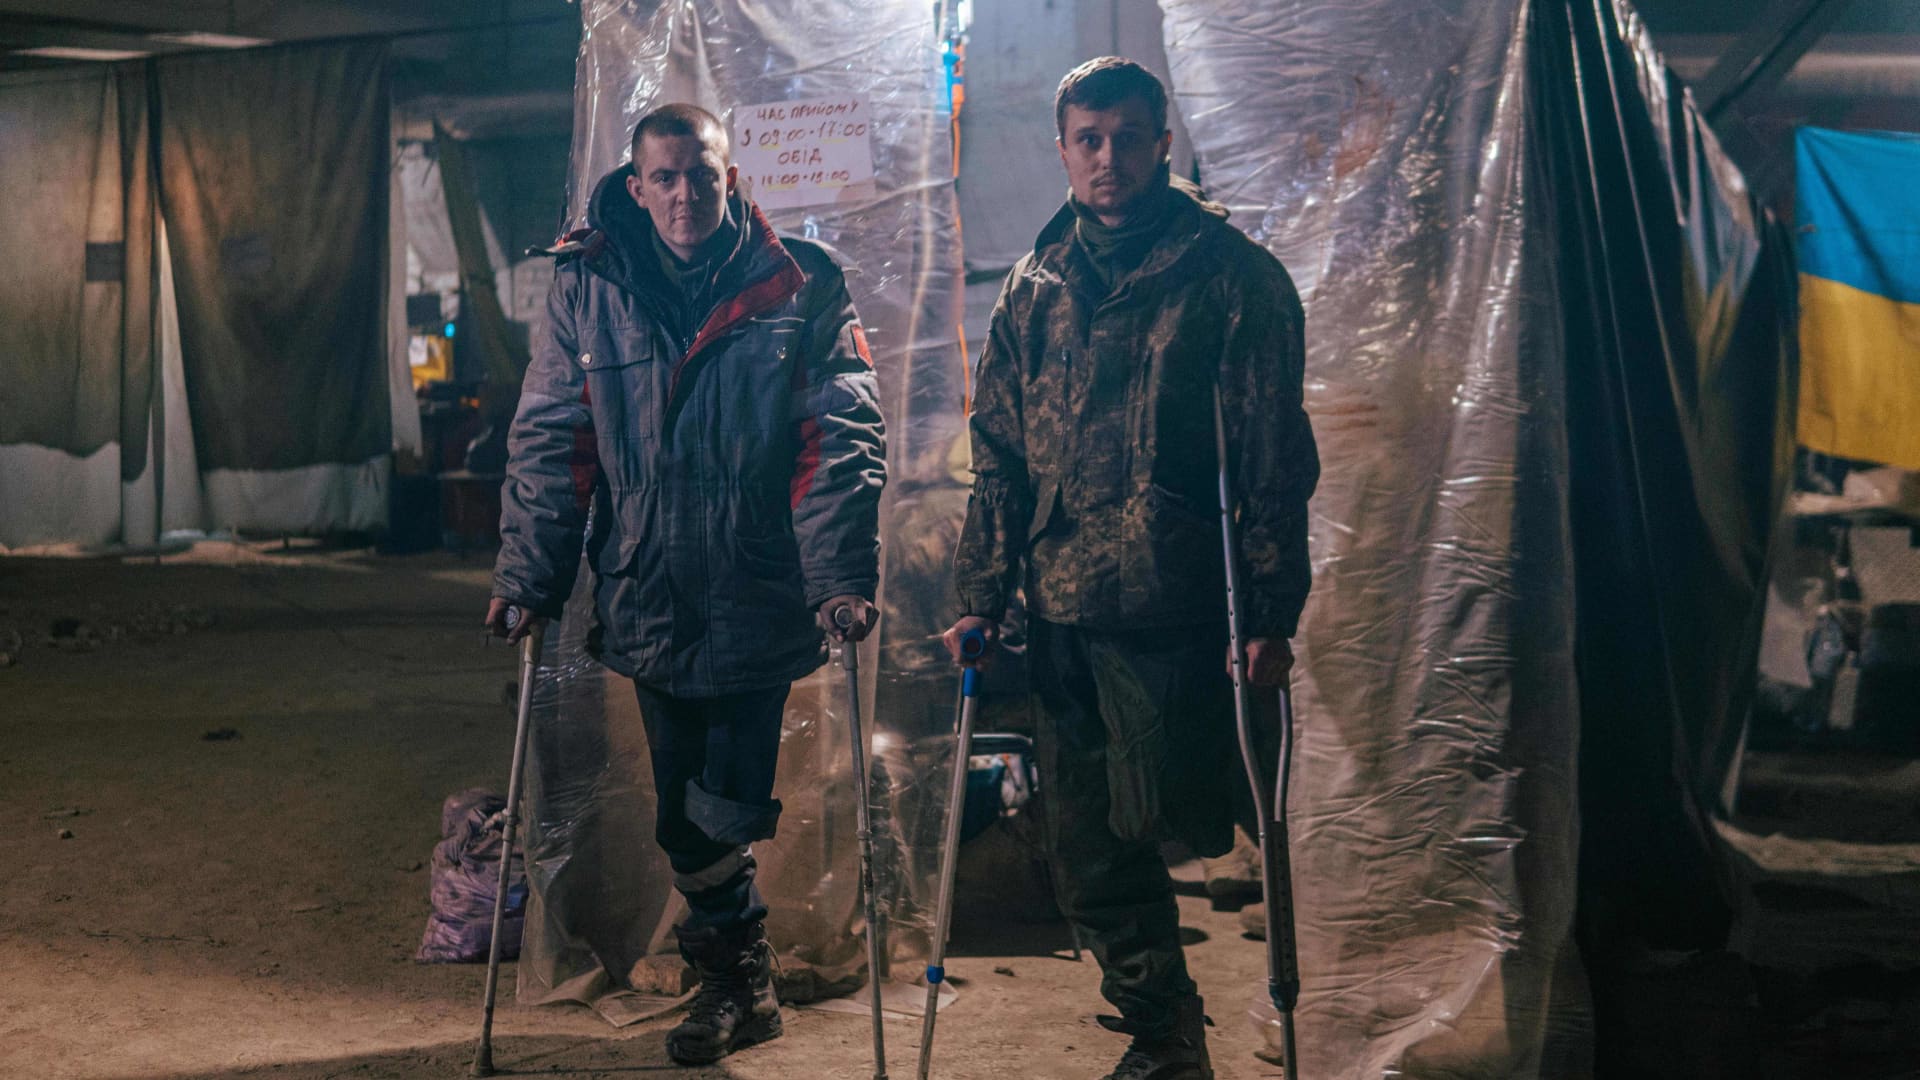 This photo released on May 10, 2022 by the Azov regiment shows two injured Ukrainian servicemen inside the Azovstal iron and steel works factory in eastern Mariupol, Ukraine, amid the Russian invasion. The Russian army is holding more than 3,000 civilians from Mariupol at a former penal colony near Olenivka in the Donetsk region of eastern Ukraine, according to a Ukrainian human rights official cited by the Associated Press.